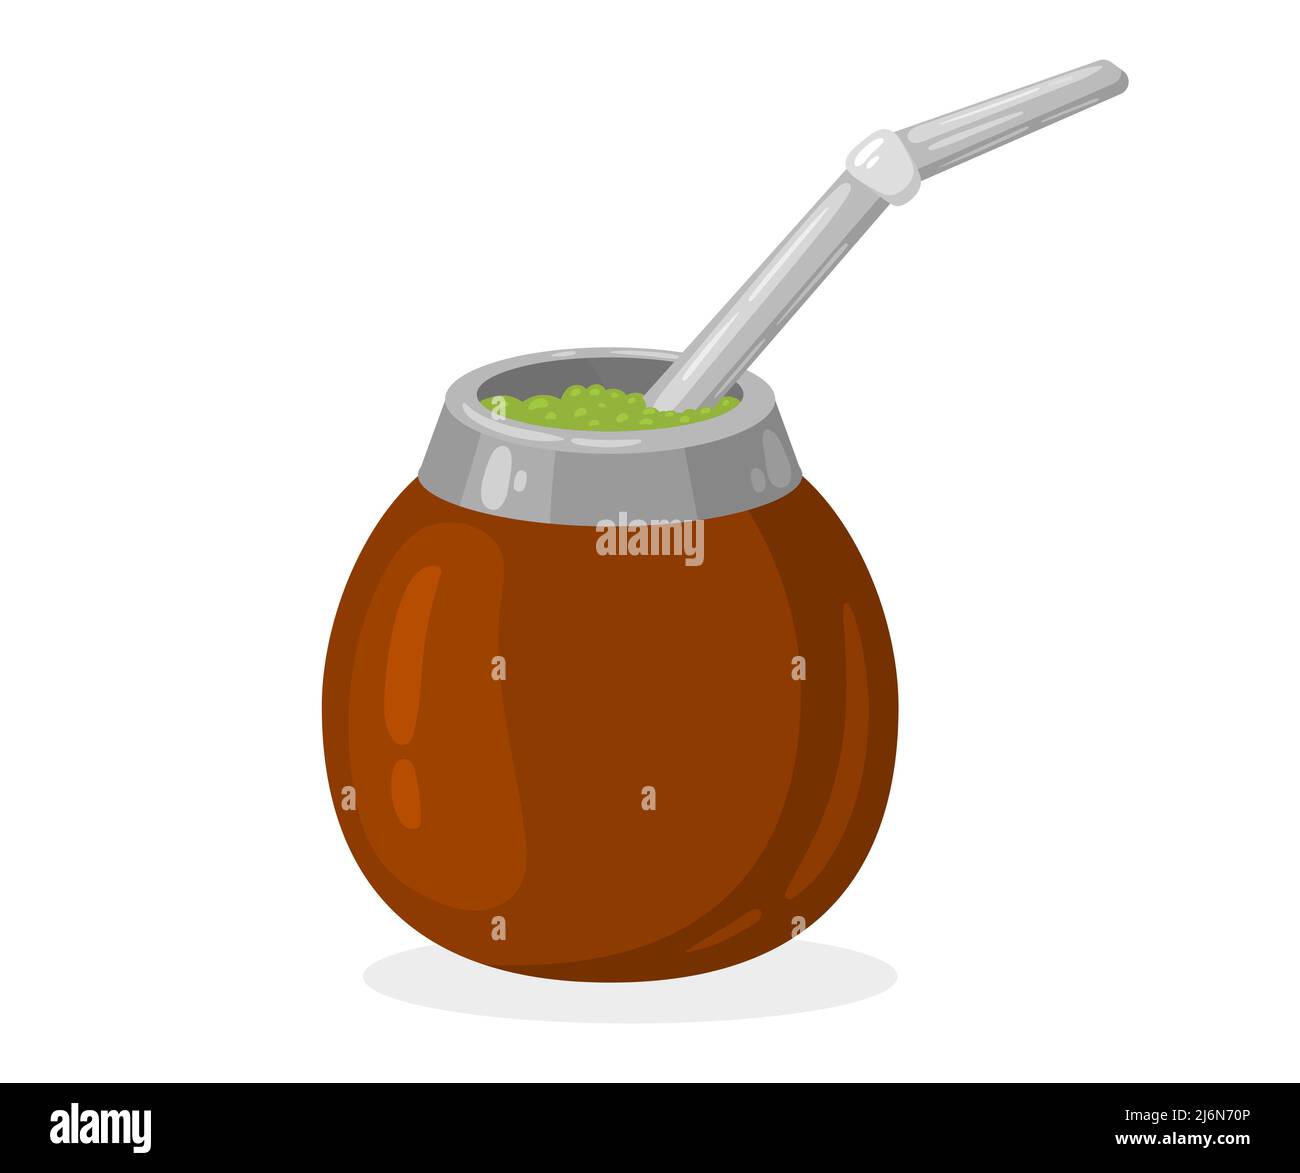 Mate tea in a calabash with a metal straw. Calabash - a traditional vessel for the preparation and drinking of mate, a tonic drink of the peoples of South America. Vector illustration. Stock Vector